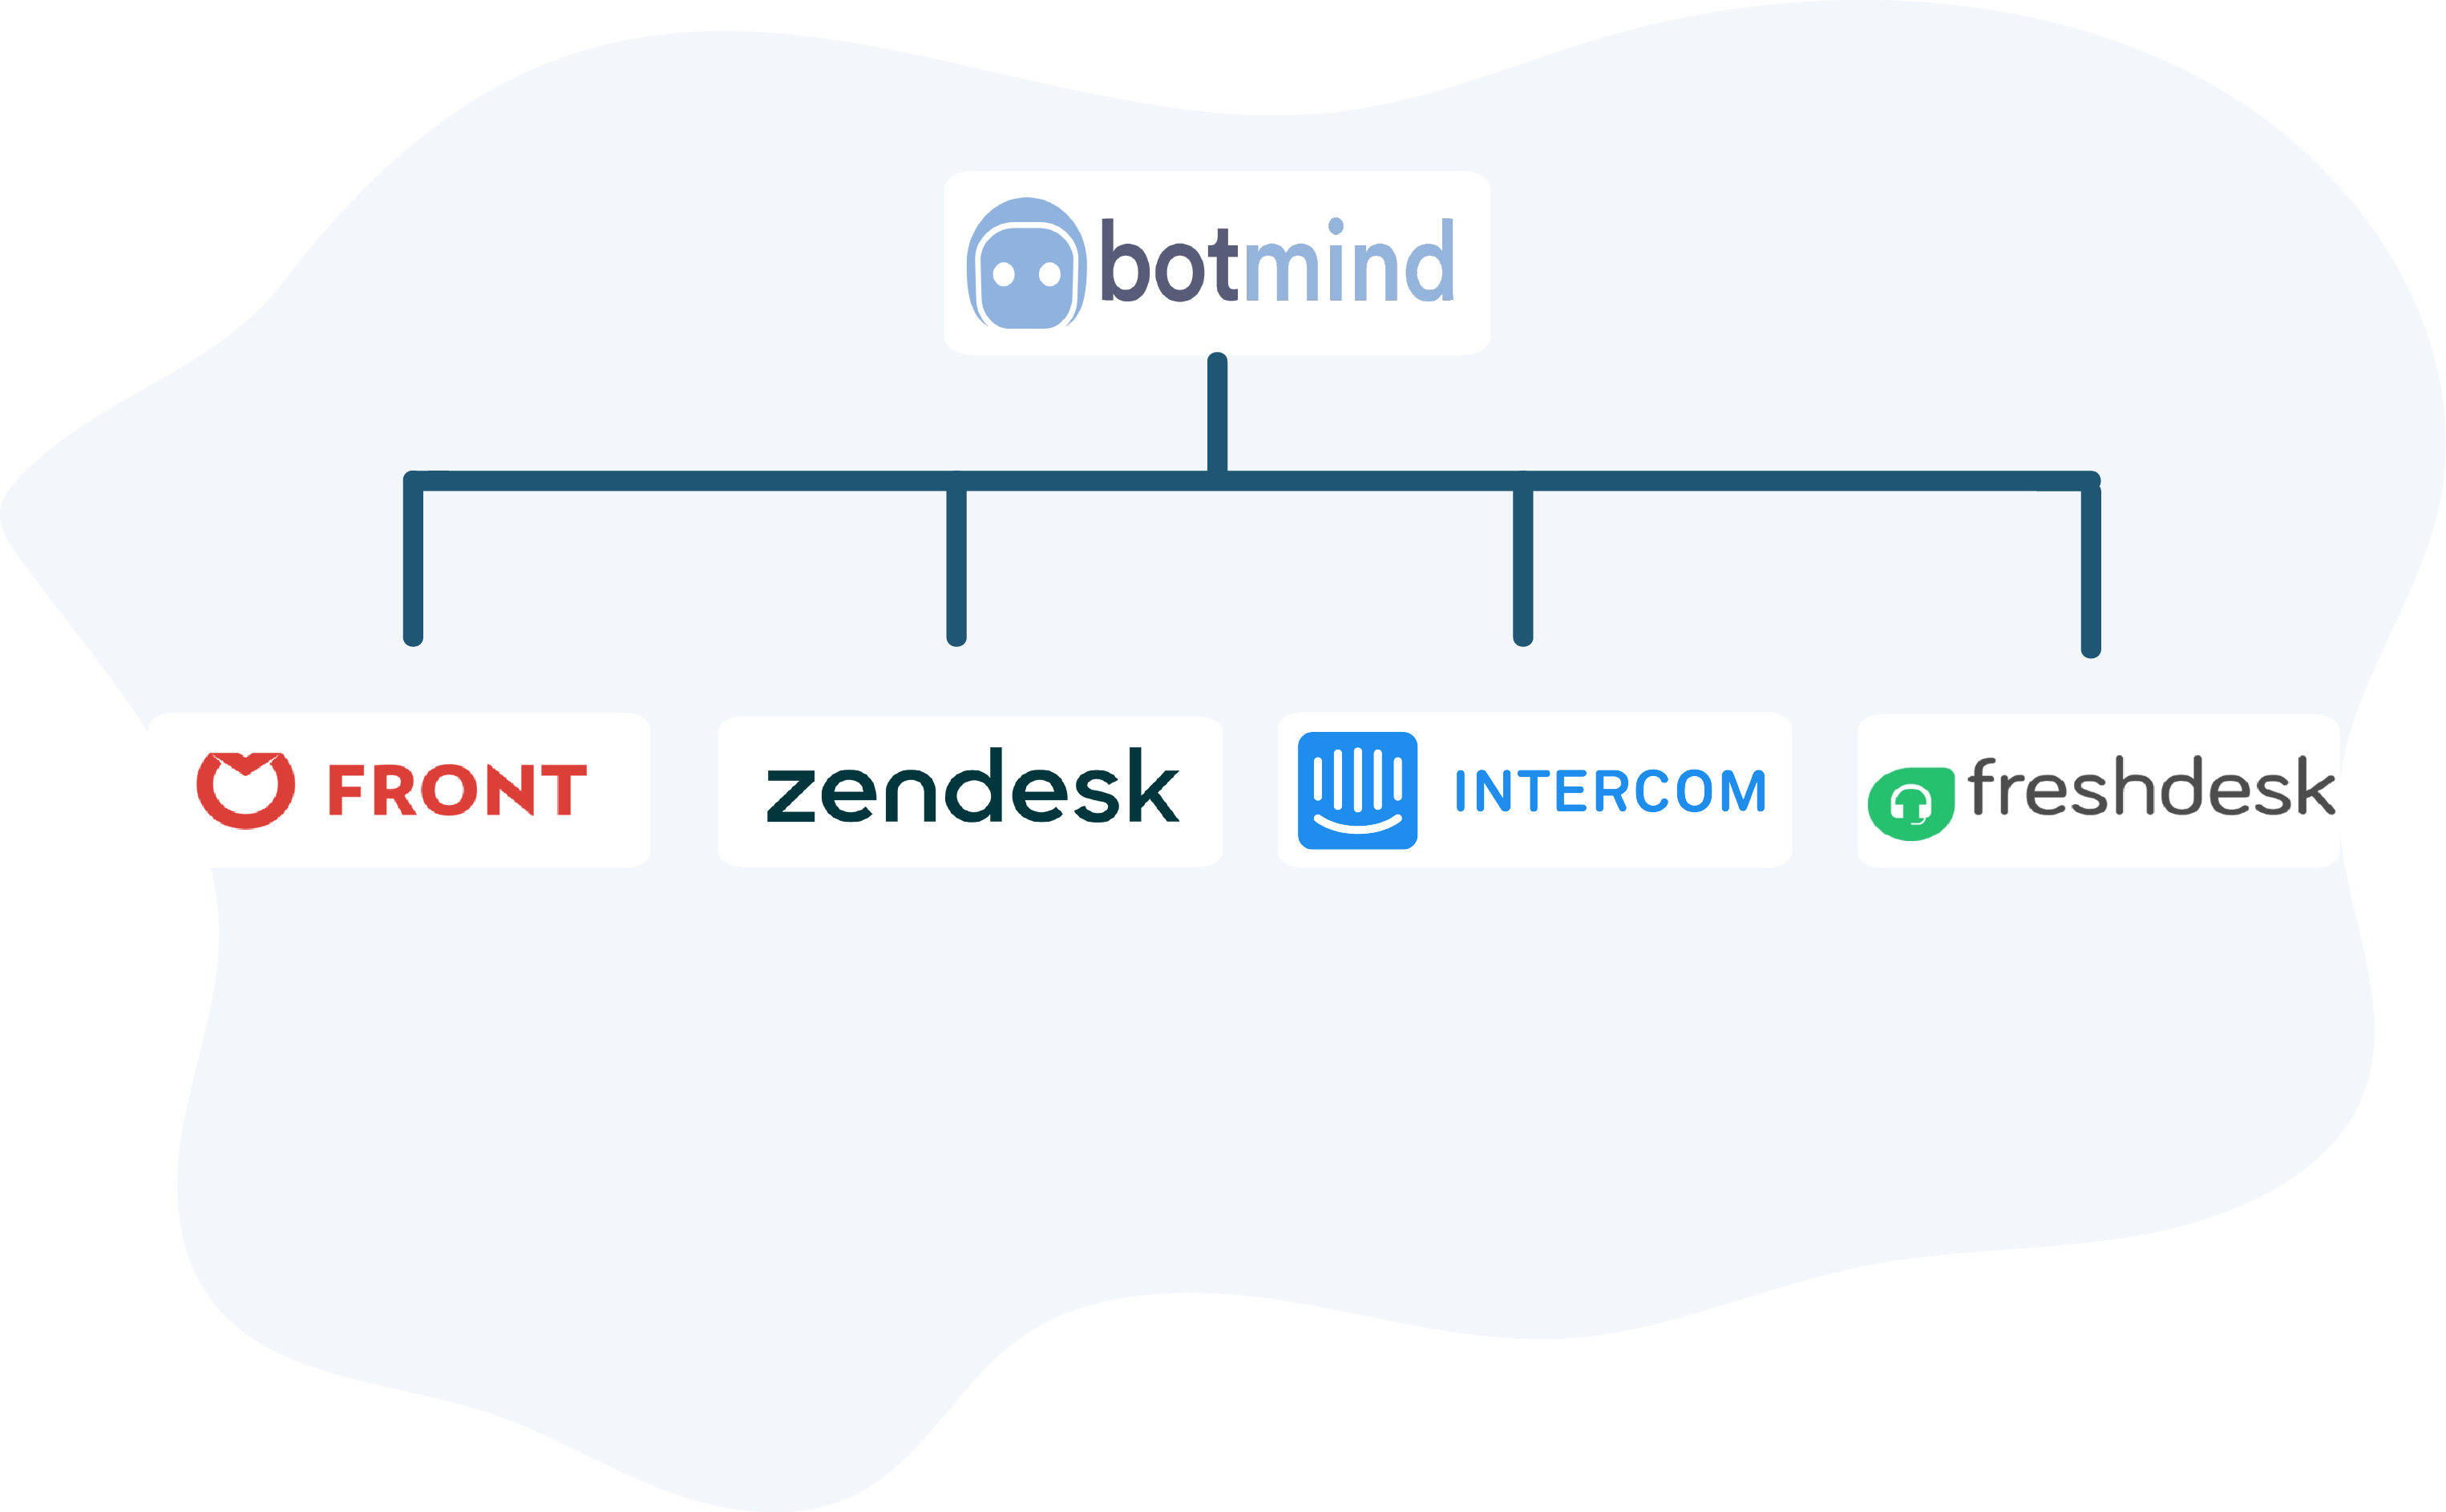 Botmind - Botmind can be easily plugged into Zendesk, Front, Intercom and Freshchat